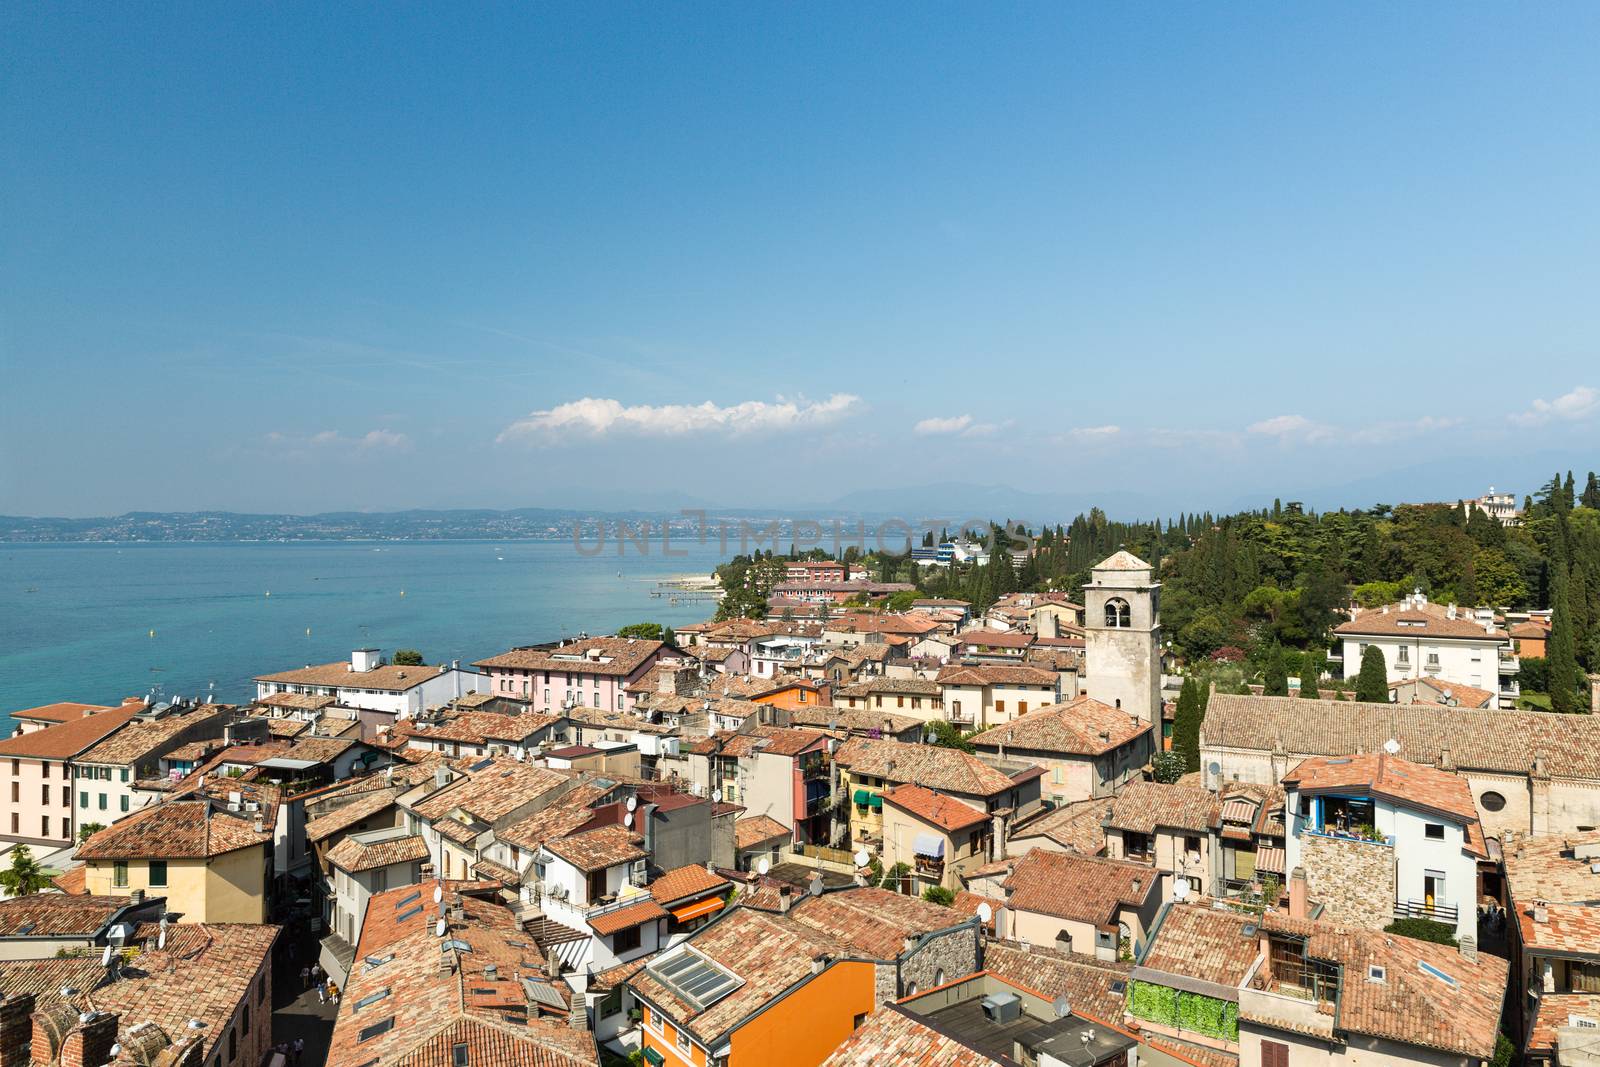 The view from Castello Scaligero in Sirmione on Lake Garda by chrisukphoto